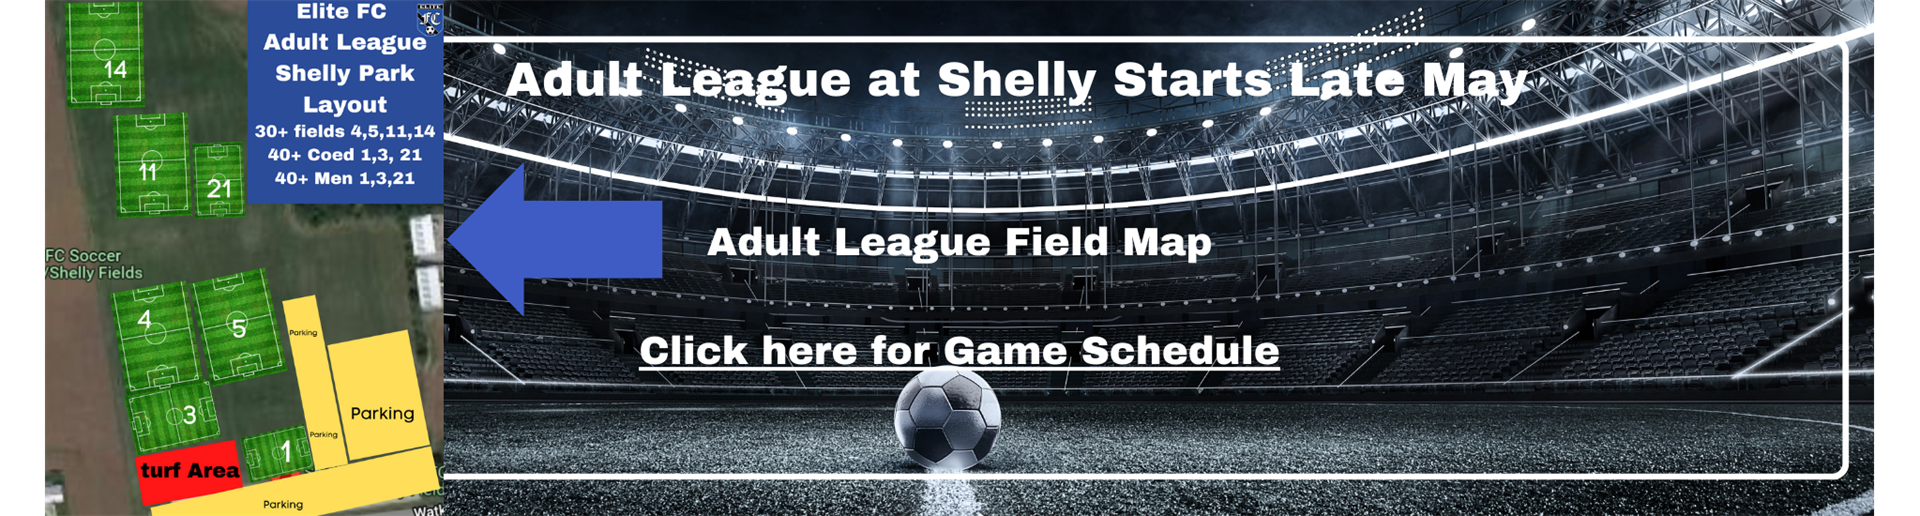 Adult League Soccer At Shelly